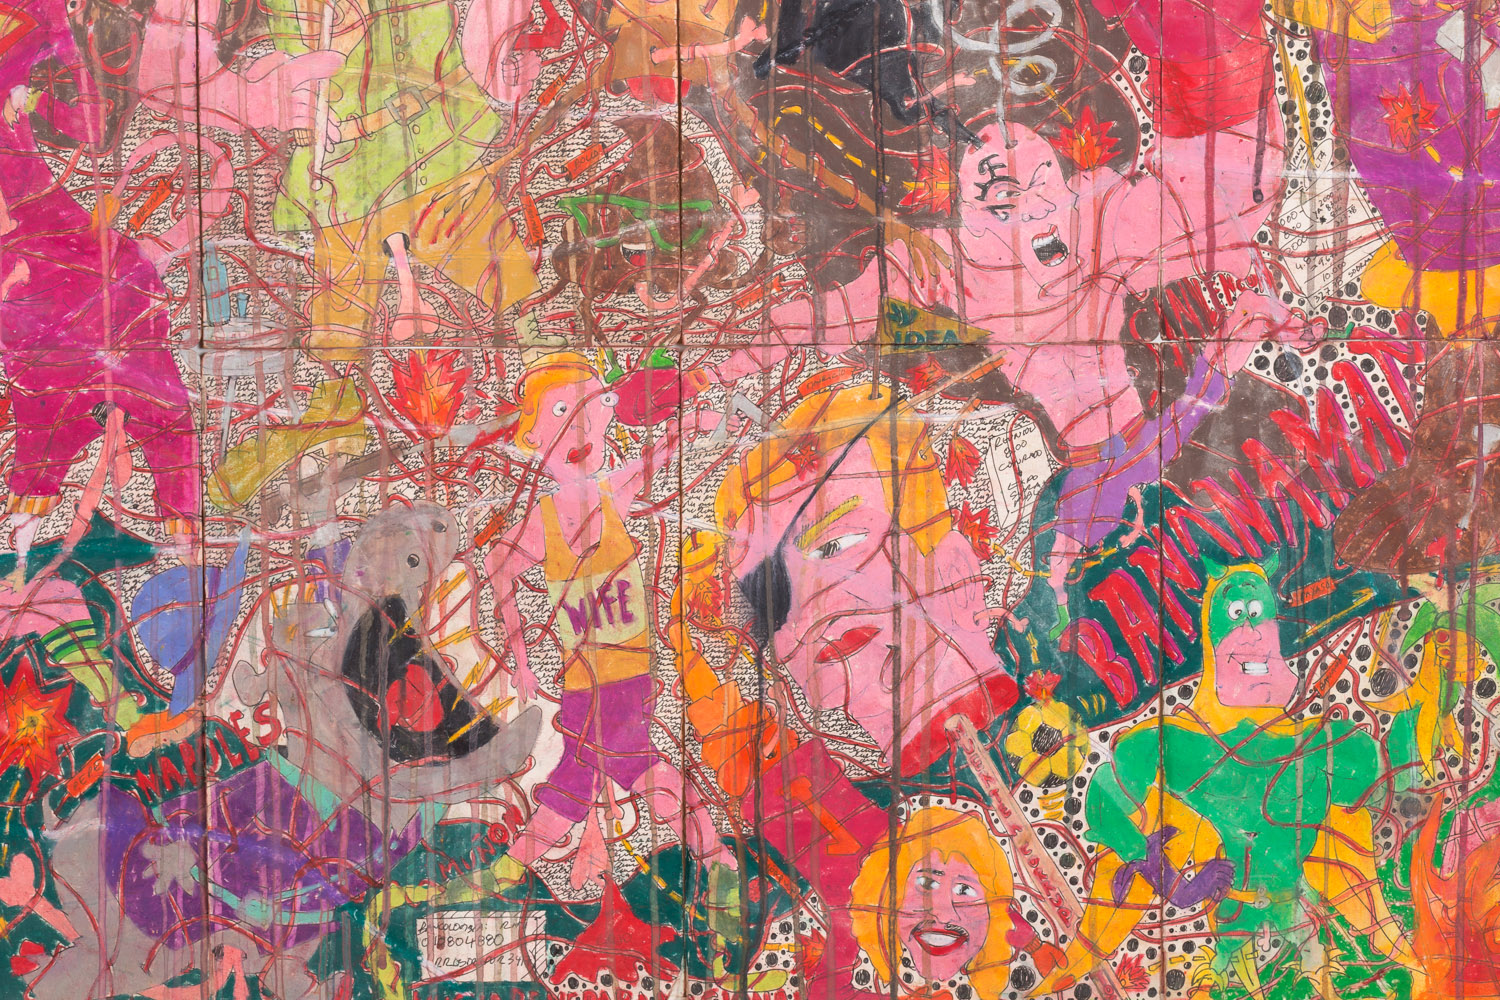 Camilo Restrepo. <em>A Land Reform 17, </em>2019. Ink, water-soluble wax pastel, tape, stickers, newspaper clippings, glue and saliva on paper, 46 3/4 x 115 3/4 inches (118.7 x 294 cm) Detail